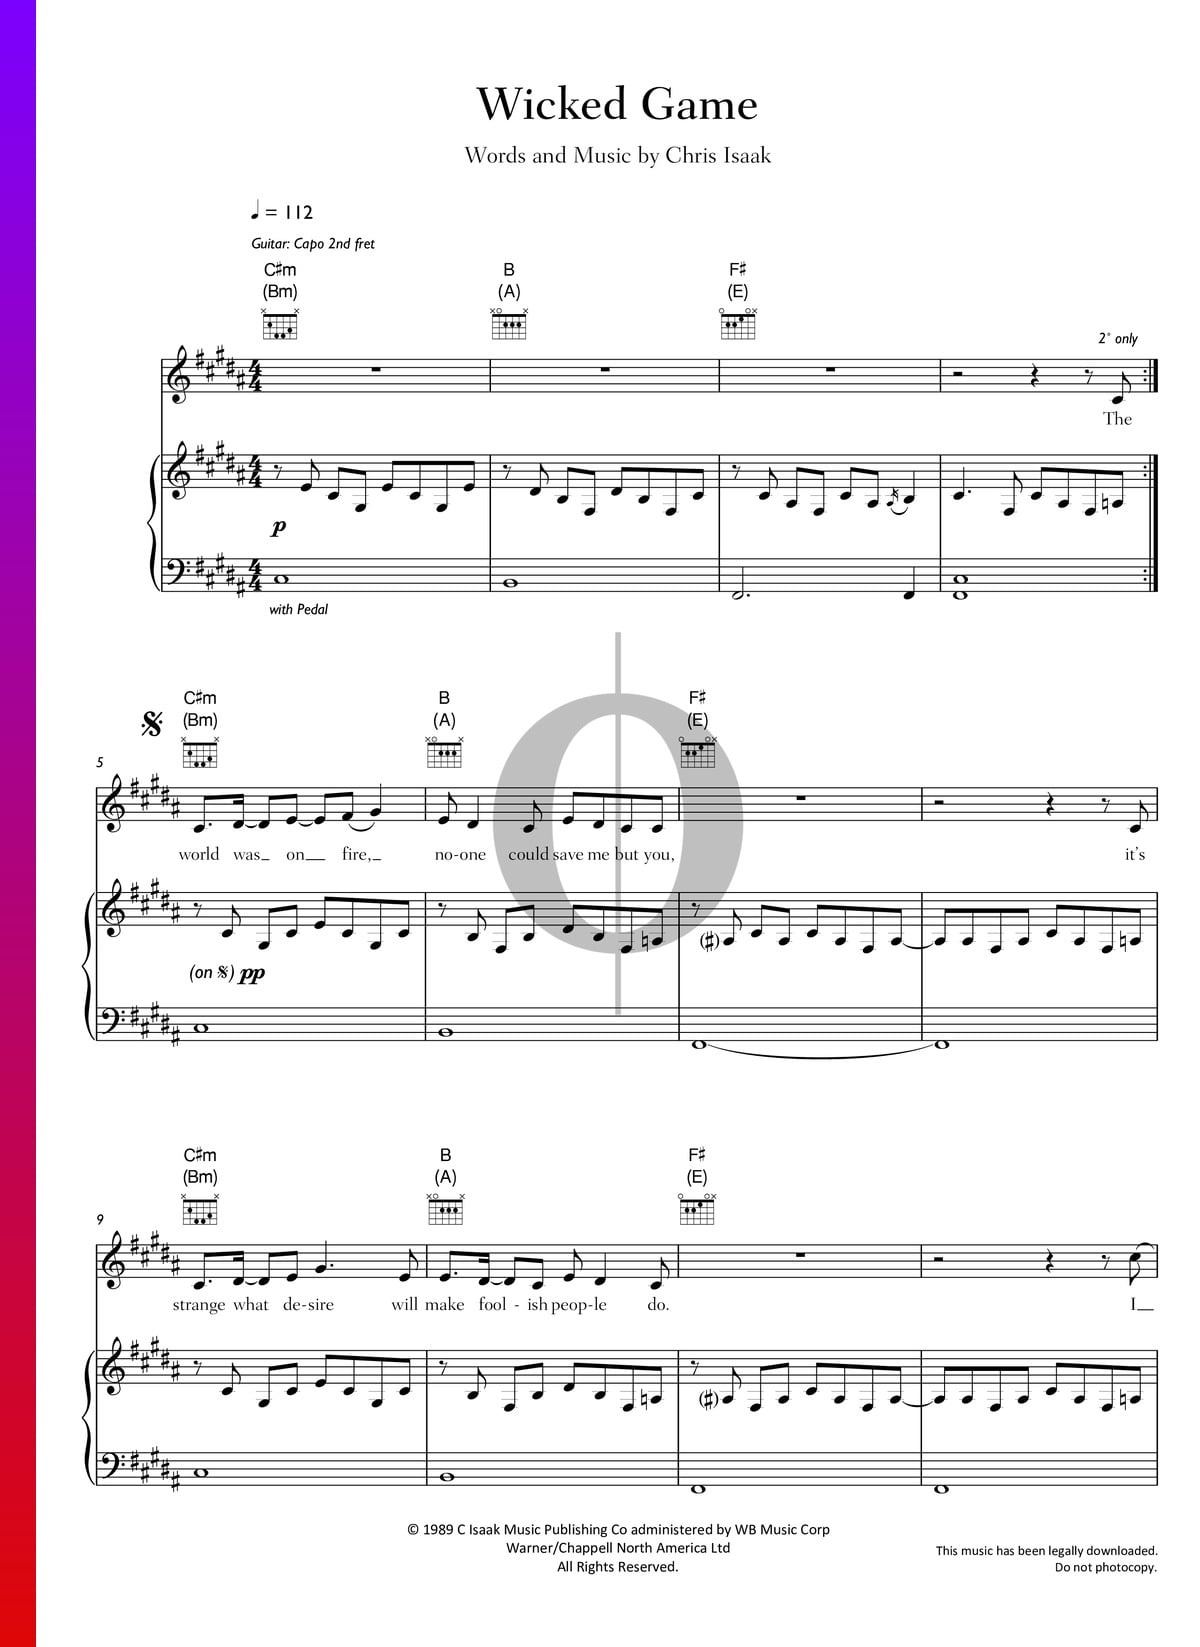 Chris Isaak #39 Wicked Game #39 Sheet Music Download Printable 56% OFF